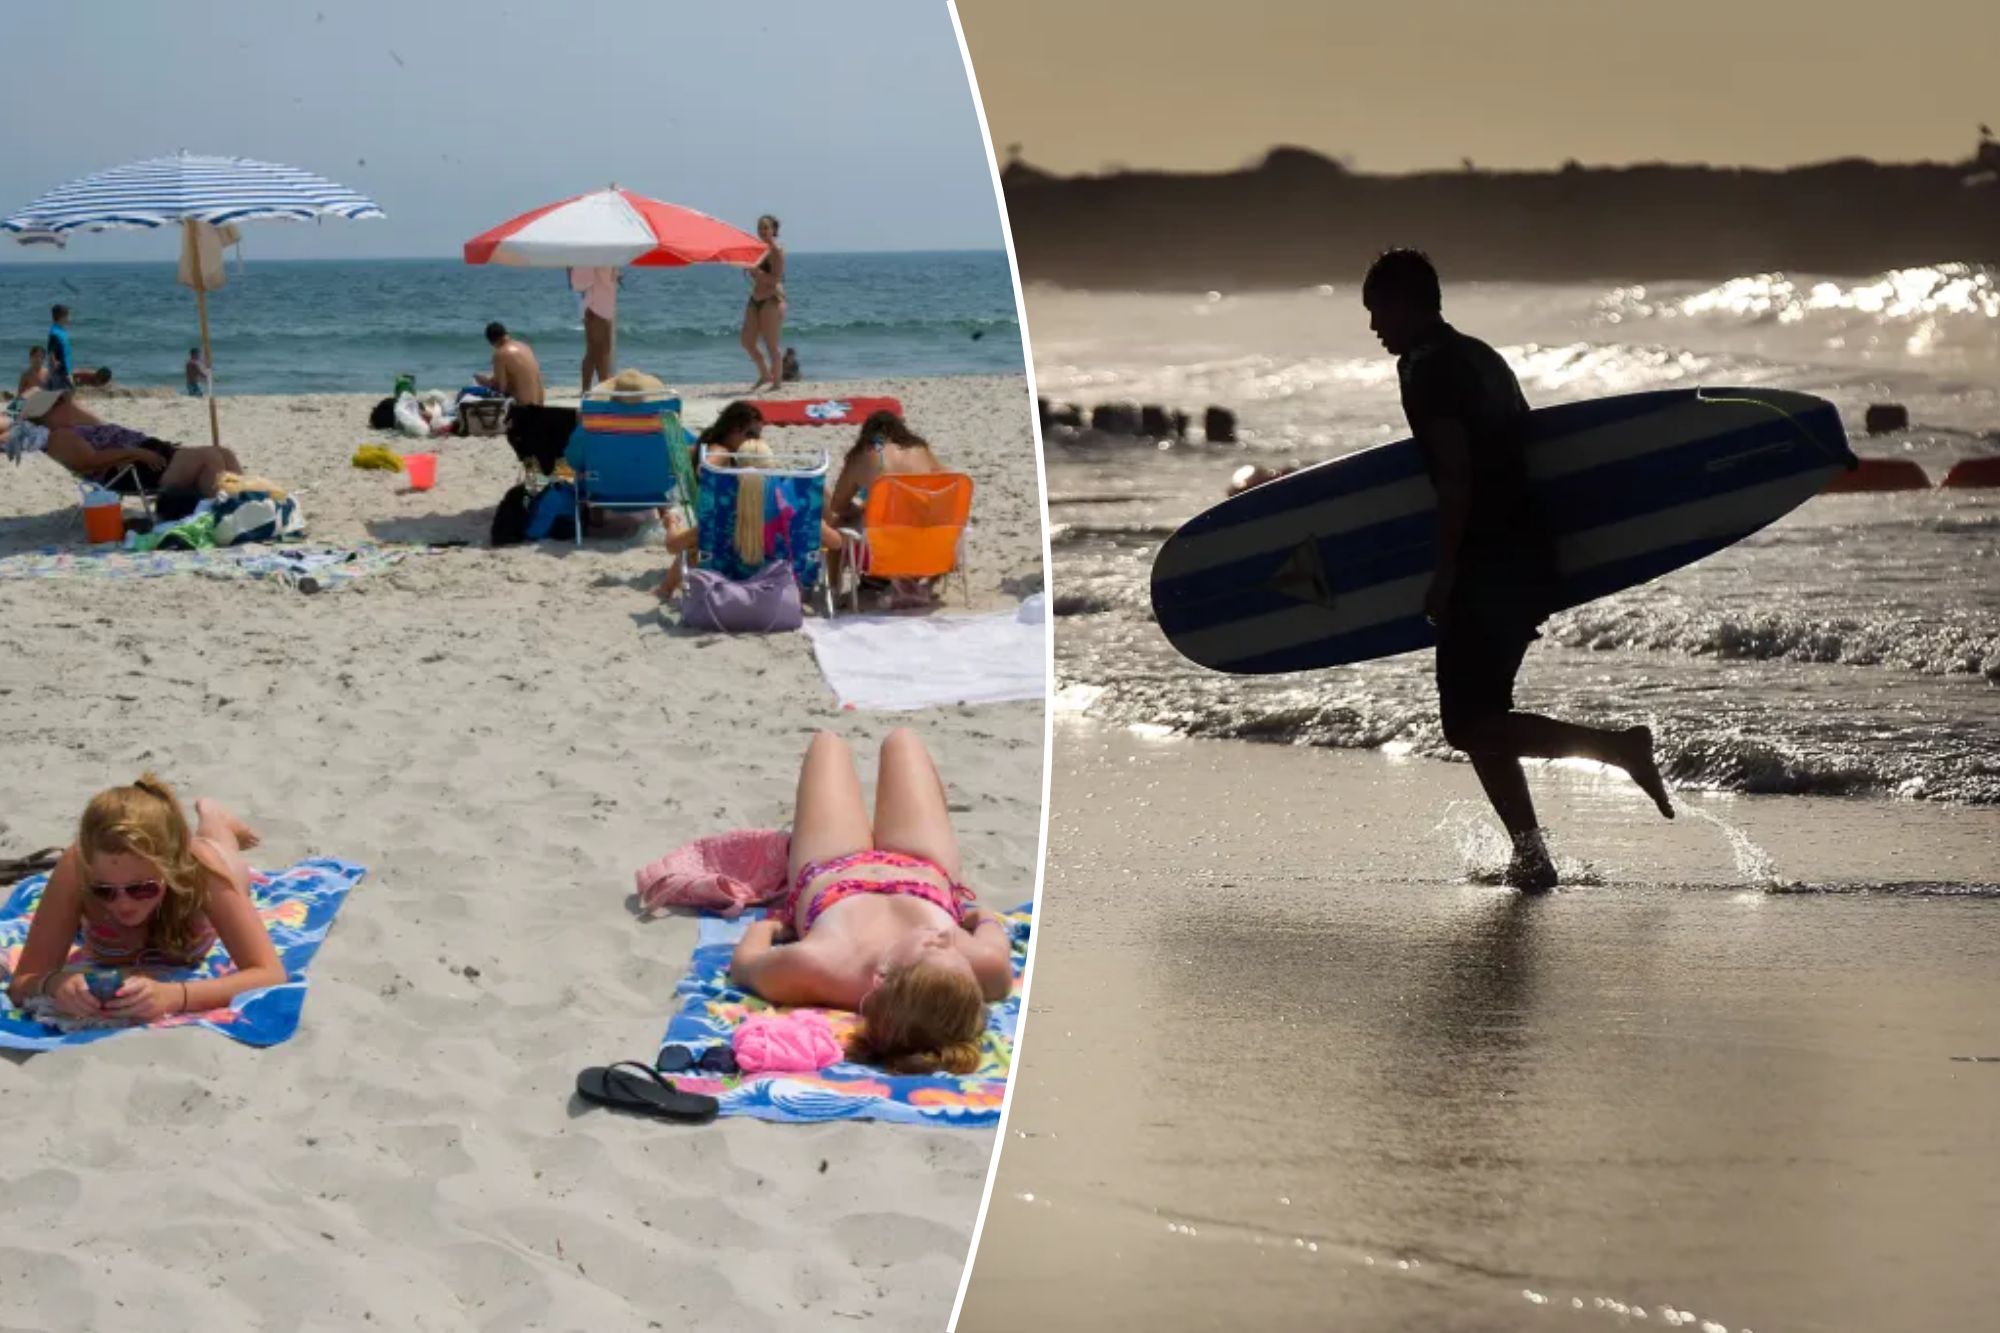 Travel & Leisure recently released its list of the "25 Best Beaches in the USA," recognizing Brooklyn's Coney Island and Rockaway Beach in Queens among the best.